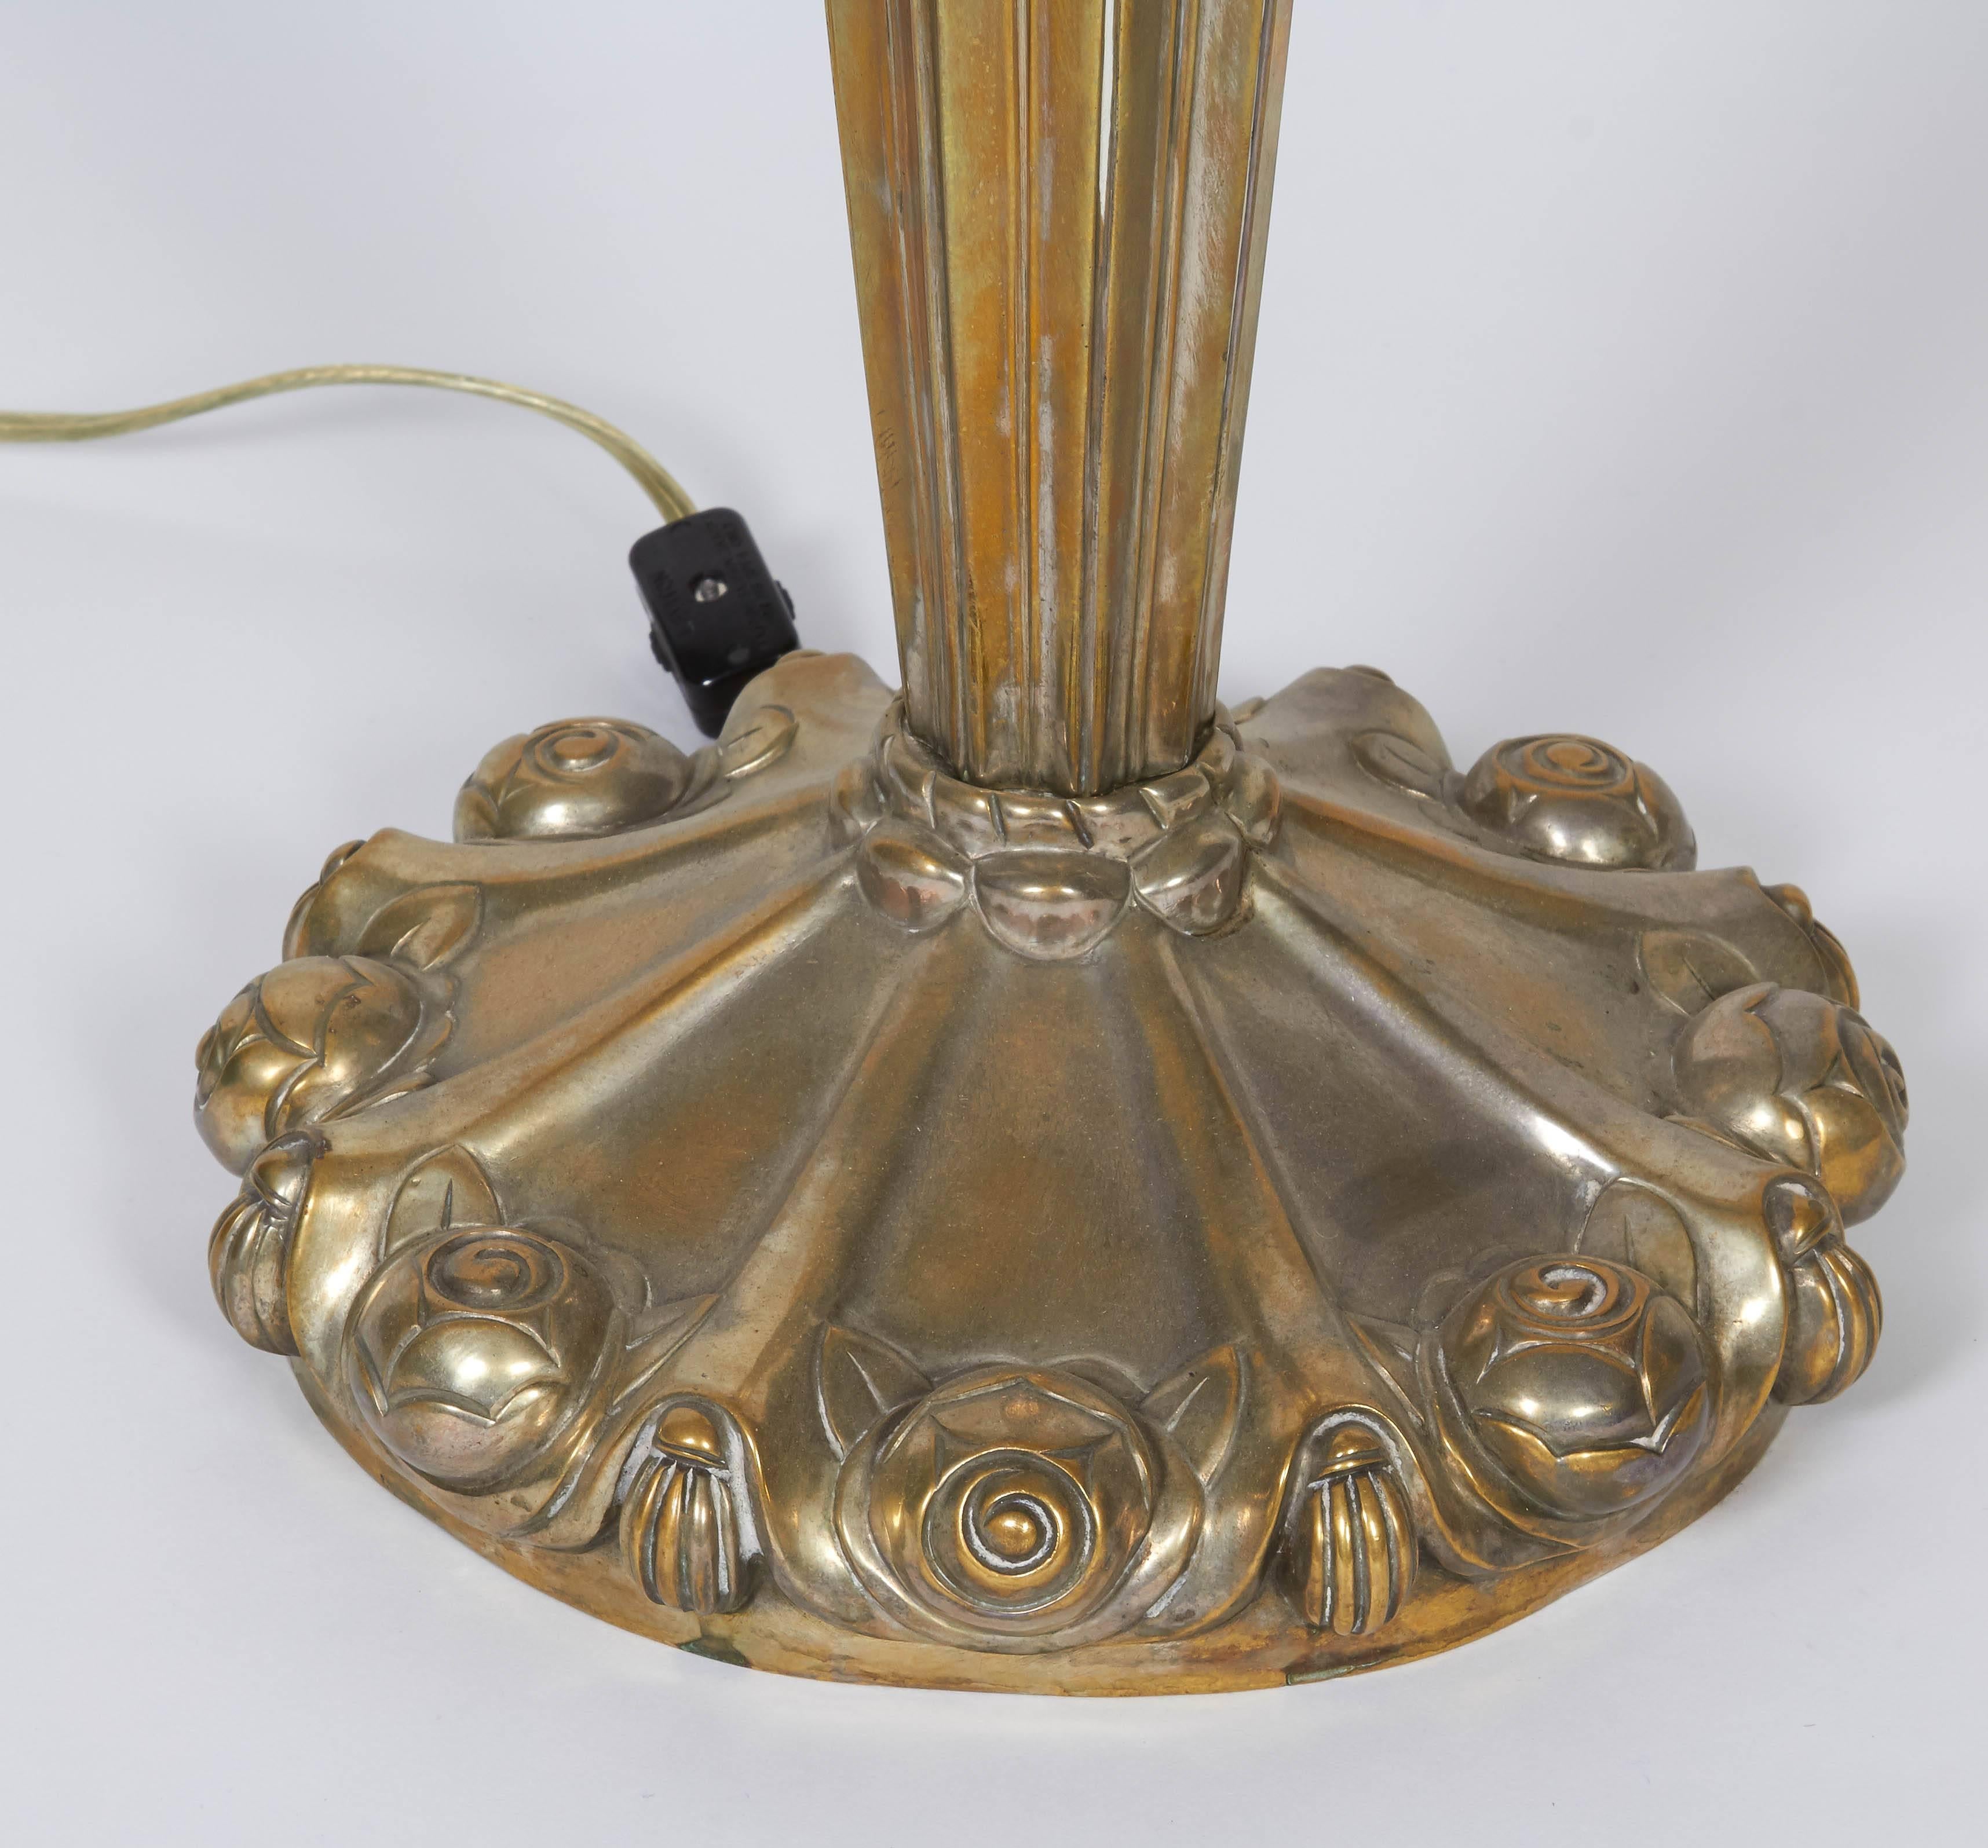 Table lamp with an original Rene Lalique 